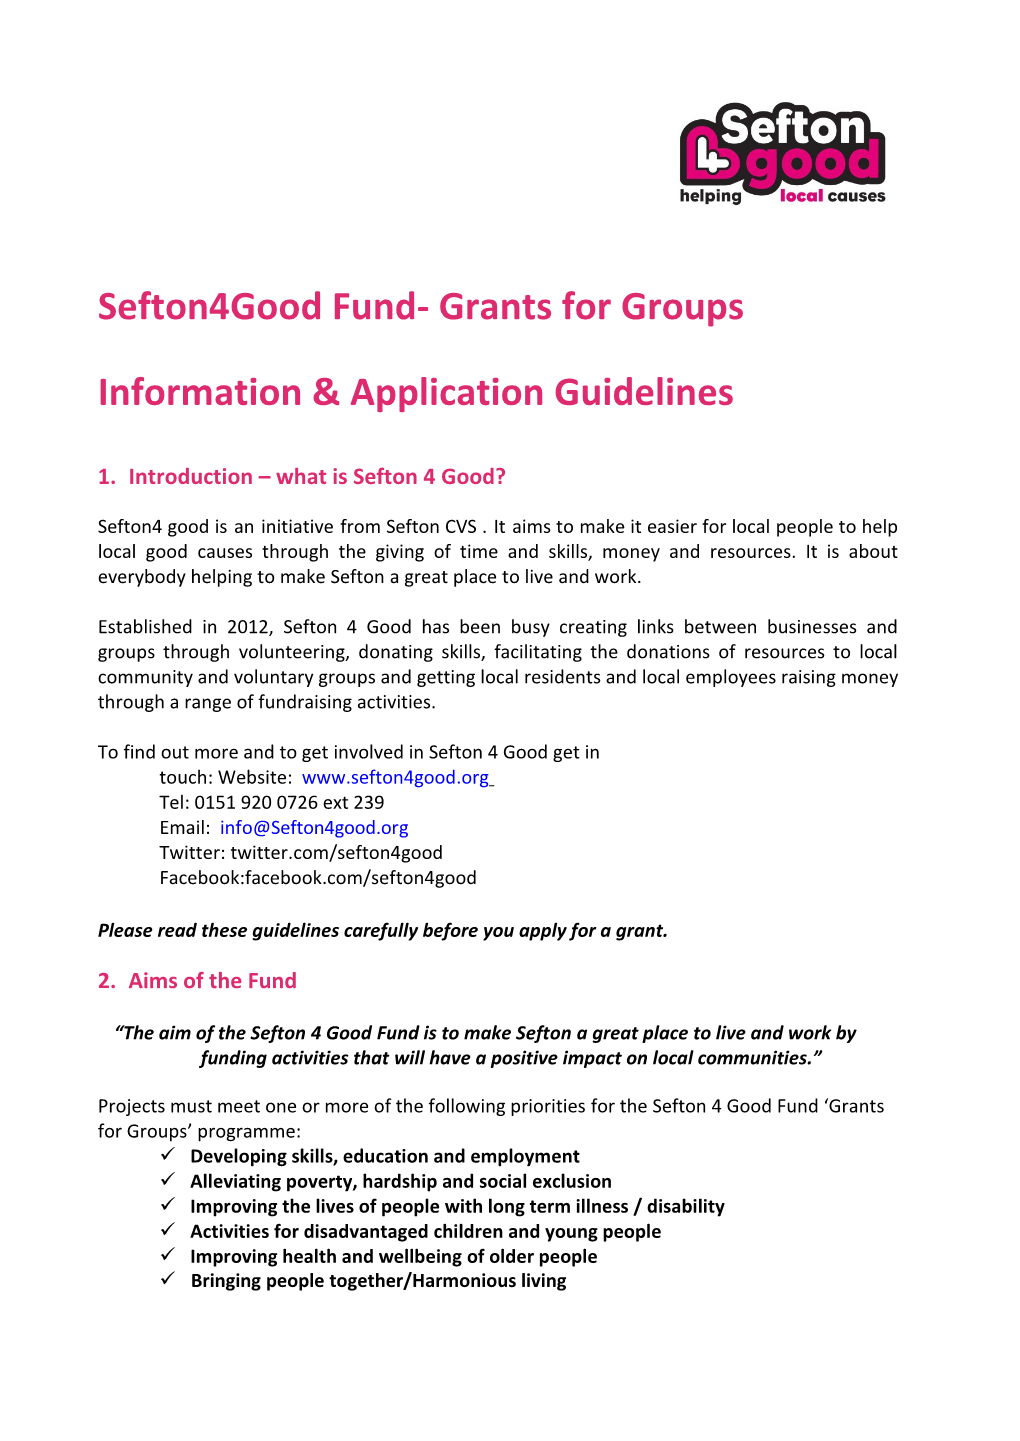 Sefton4good Fund- Grants for Groups